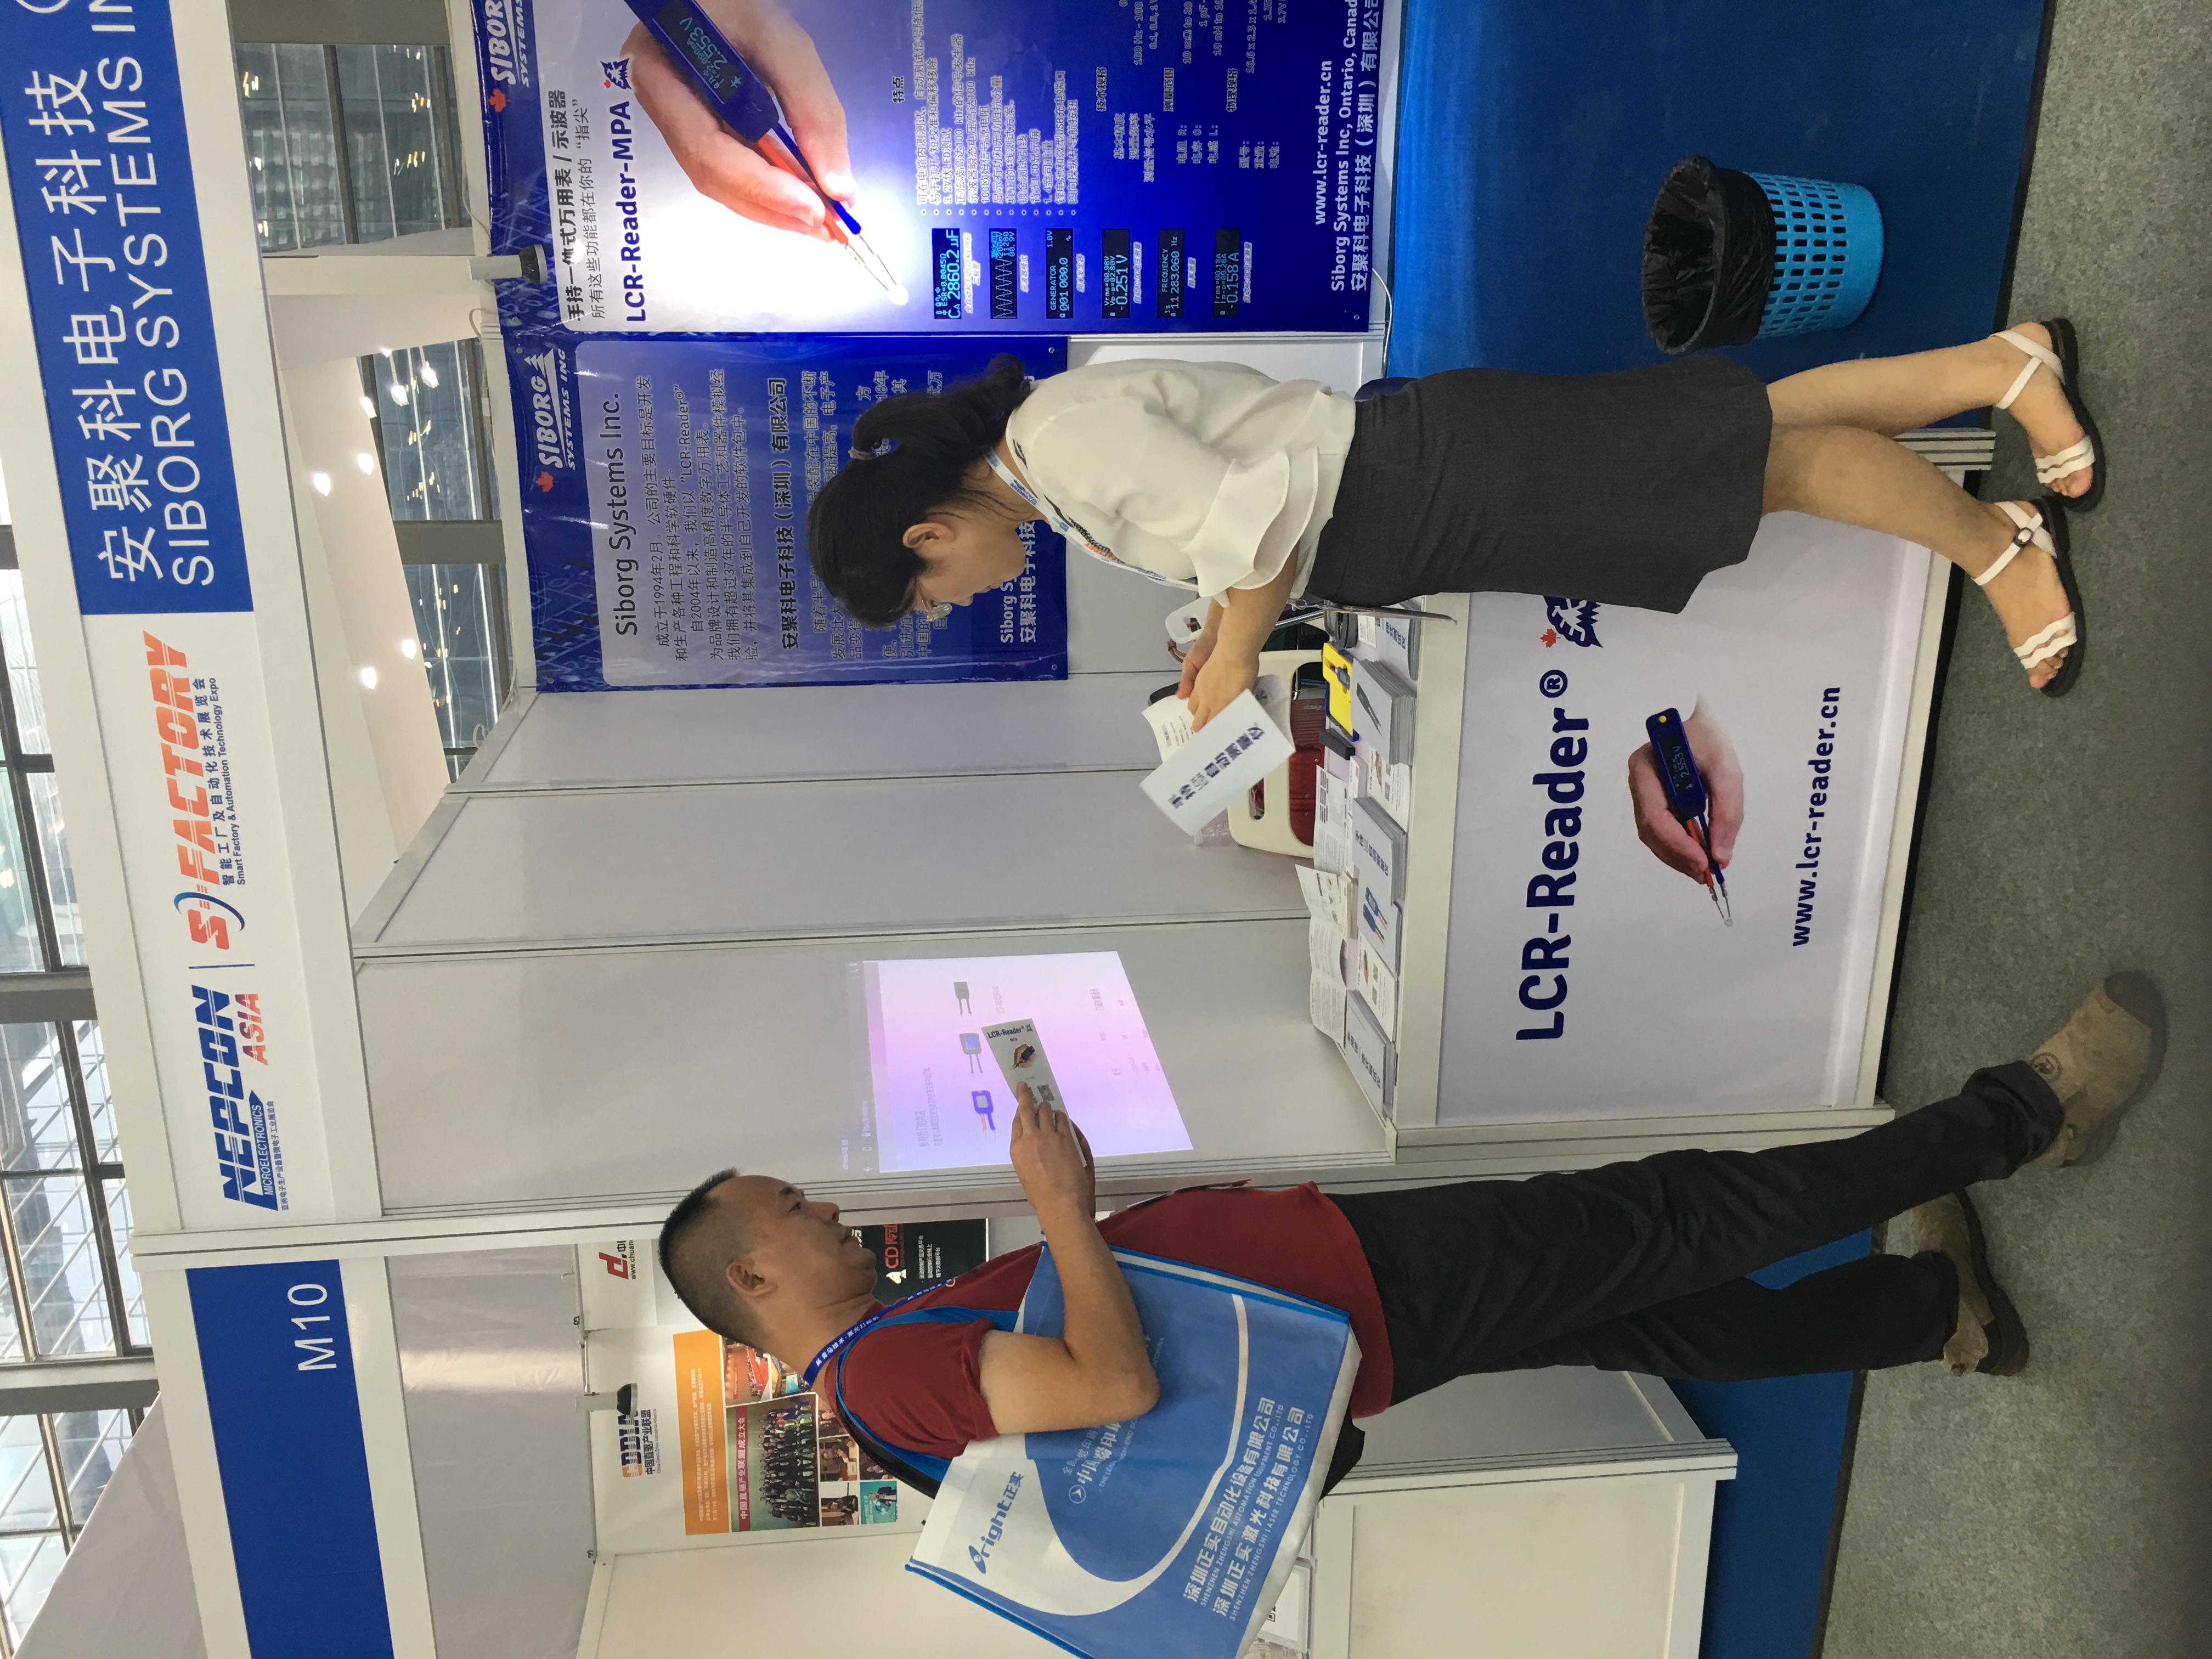 A visitor learns about LCR-Reader-MPA at Nepcon Asia